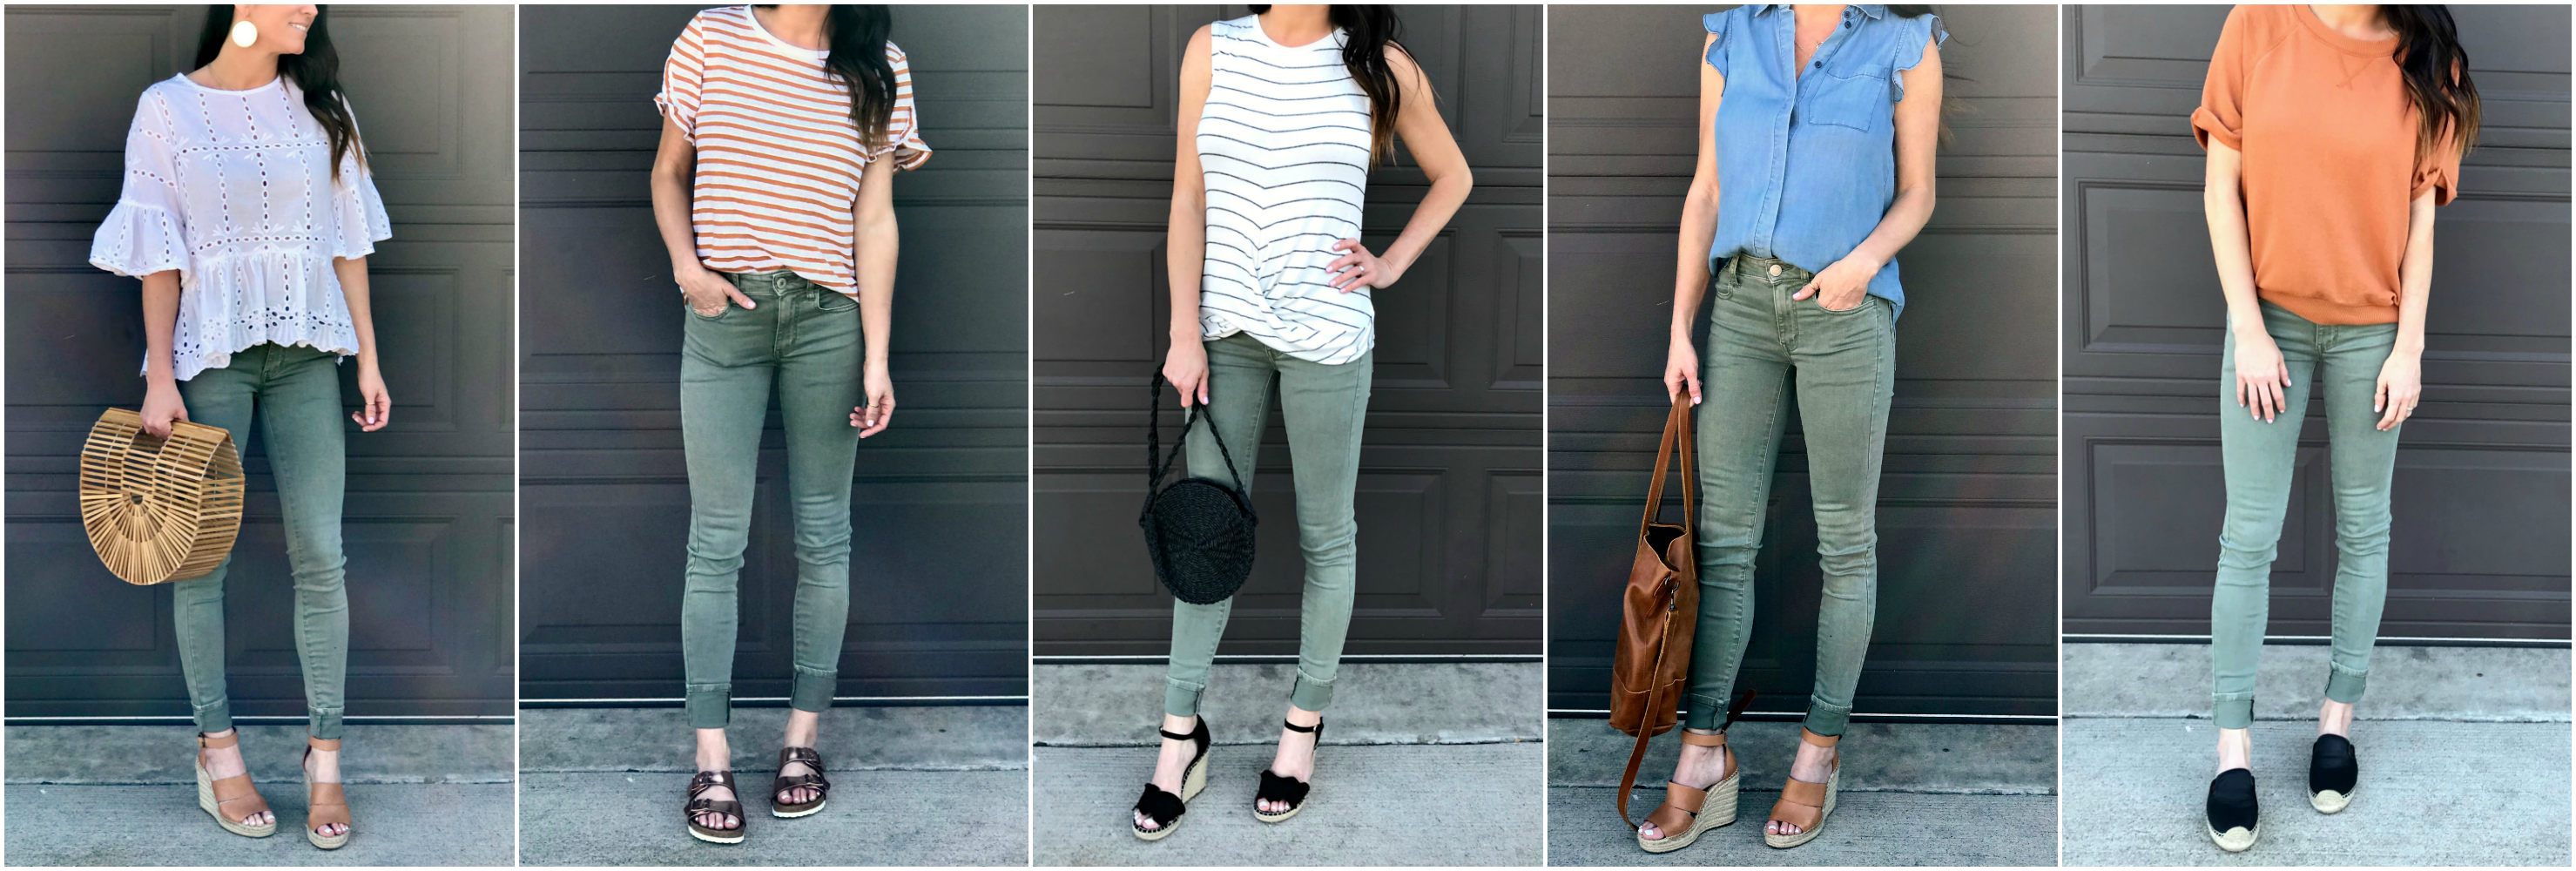 Green Pants, wedges, spring style